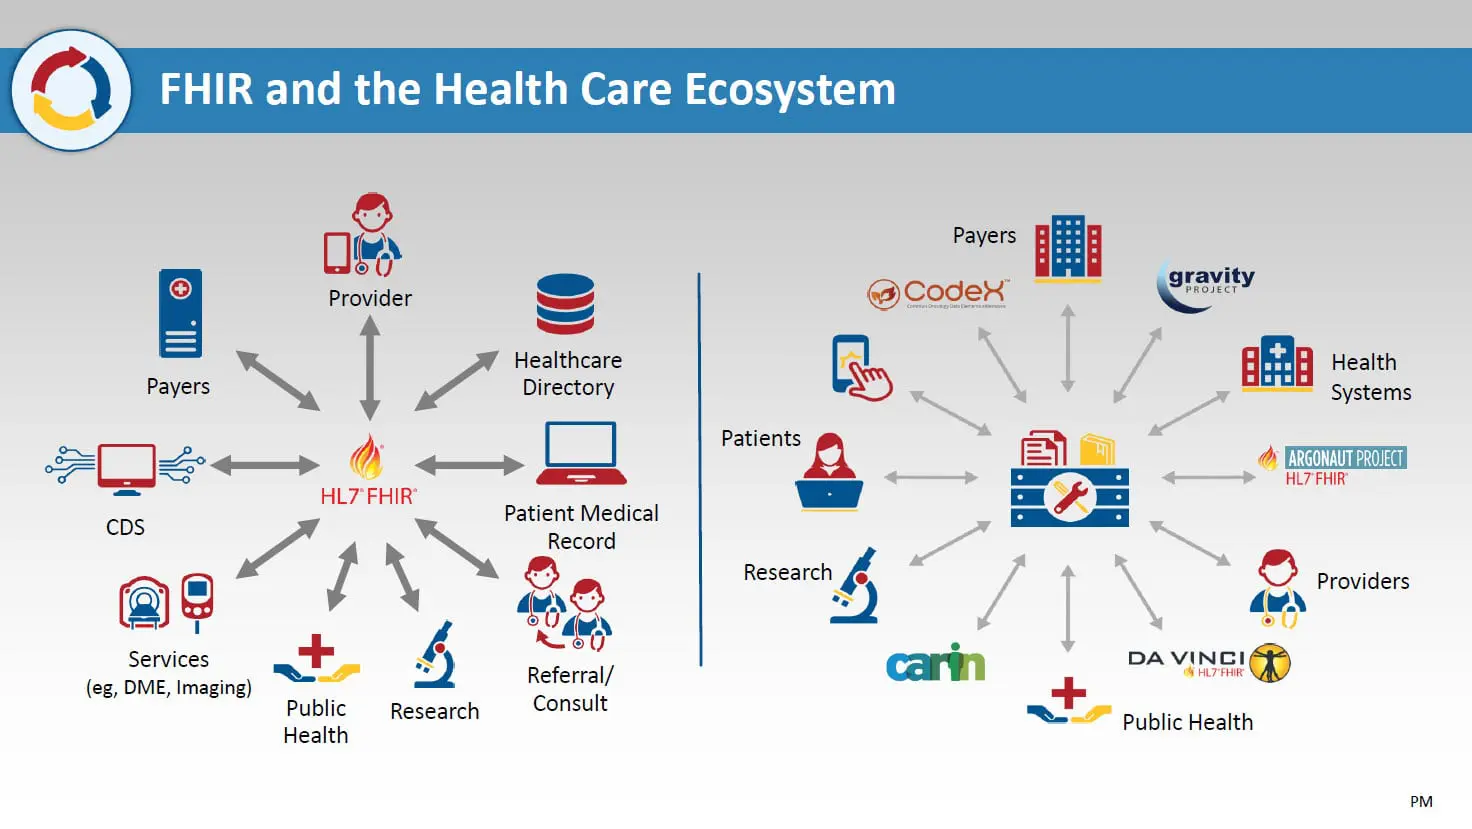 FHIR and Healthcare Ecosystem